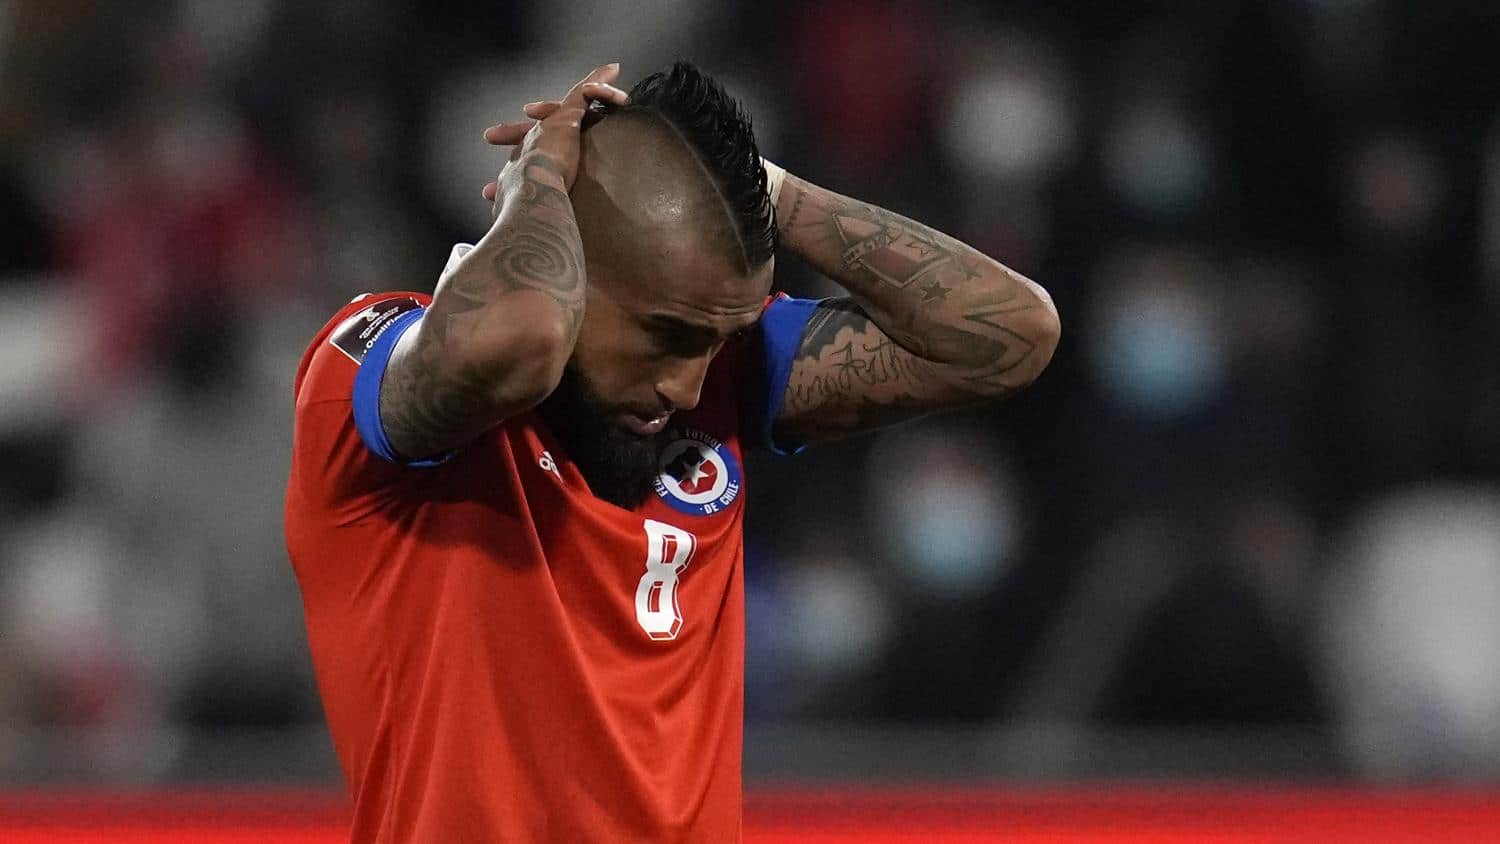 20211105 The18 Image Vidal Chile GettyImages 1345909920